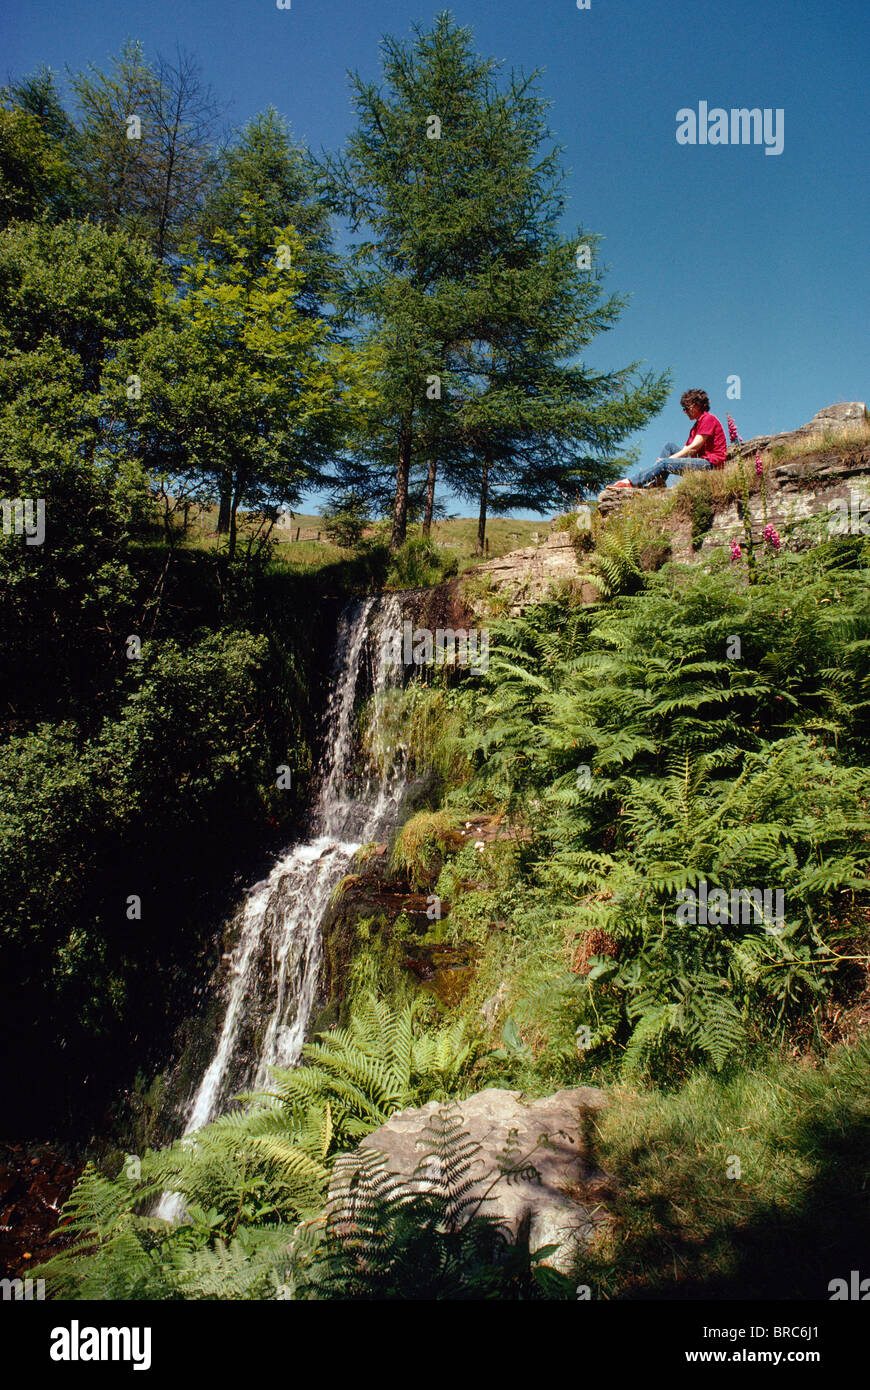 WOMAN IN RED SITTING BY SMALL WATERFALL IN BRECON BEACONS POWYS Stock Photo